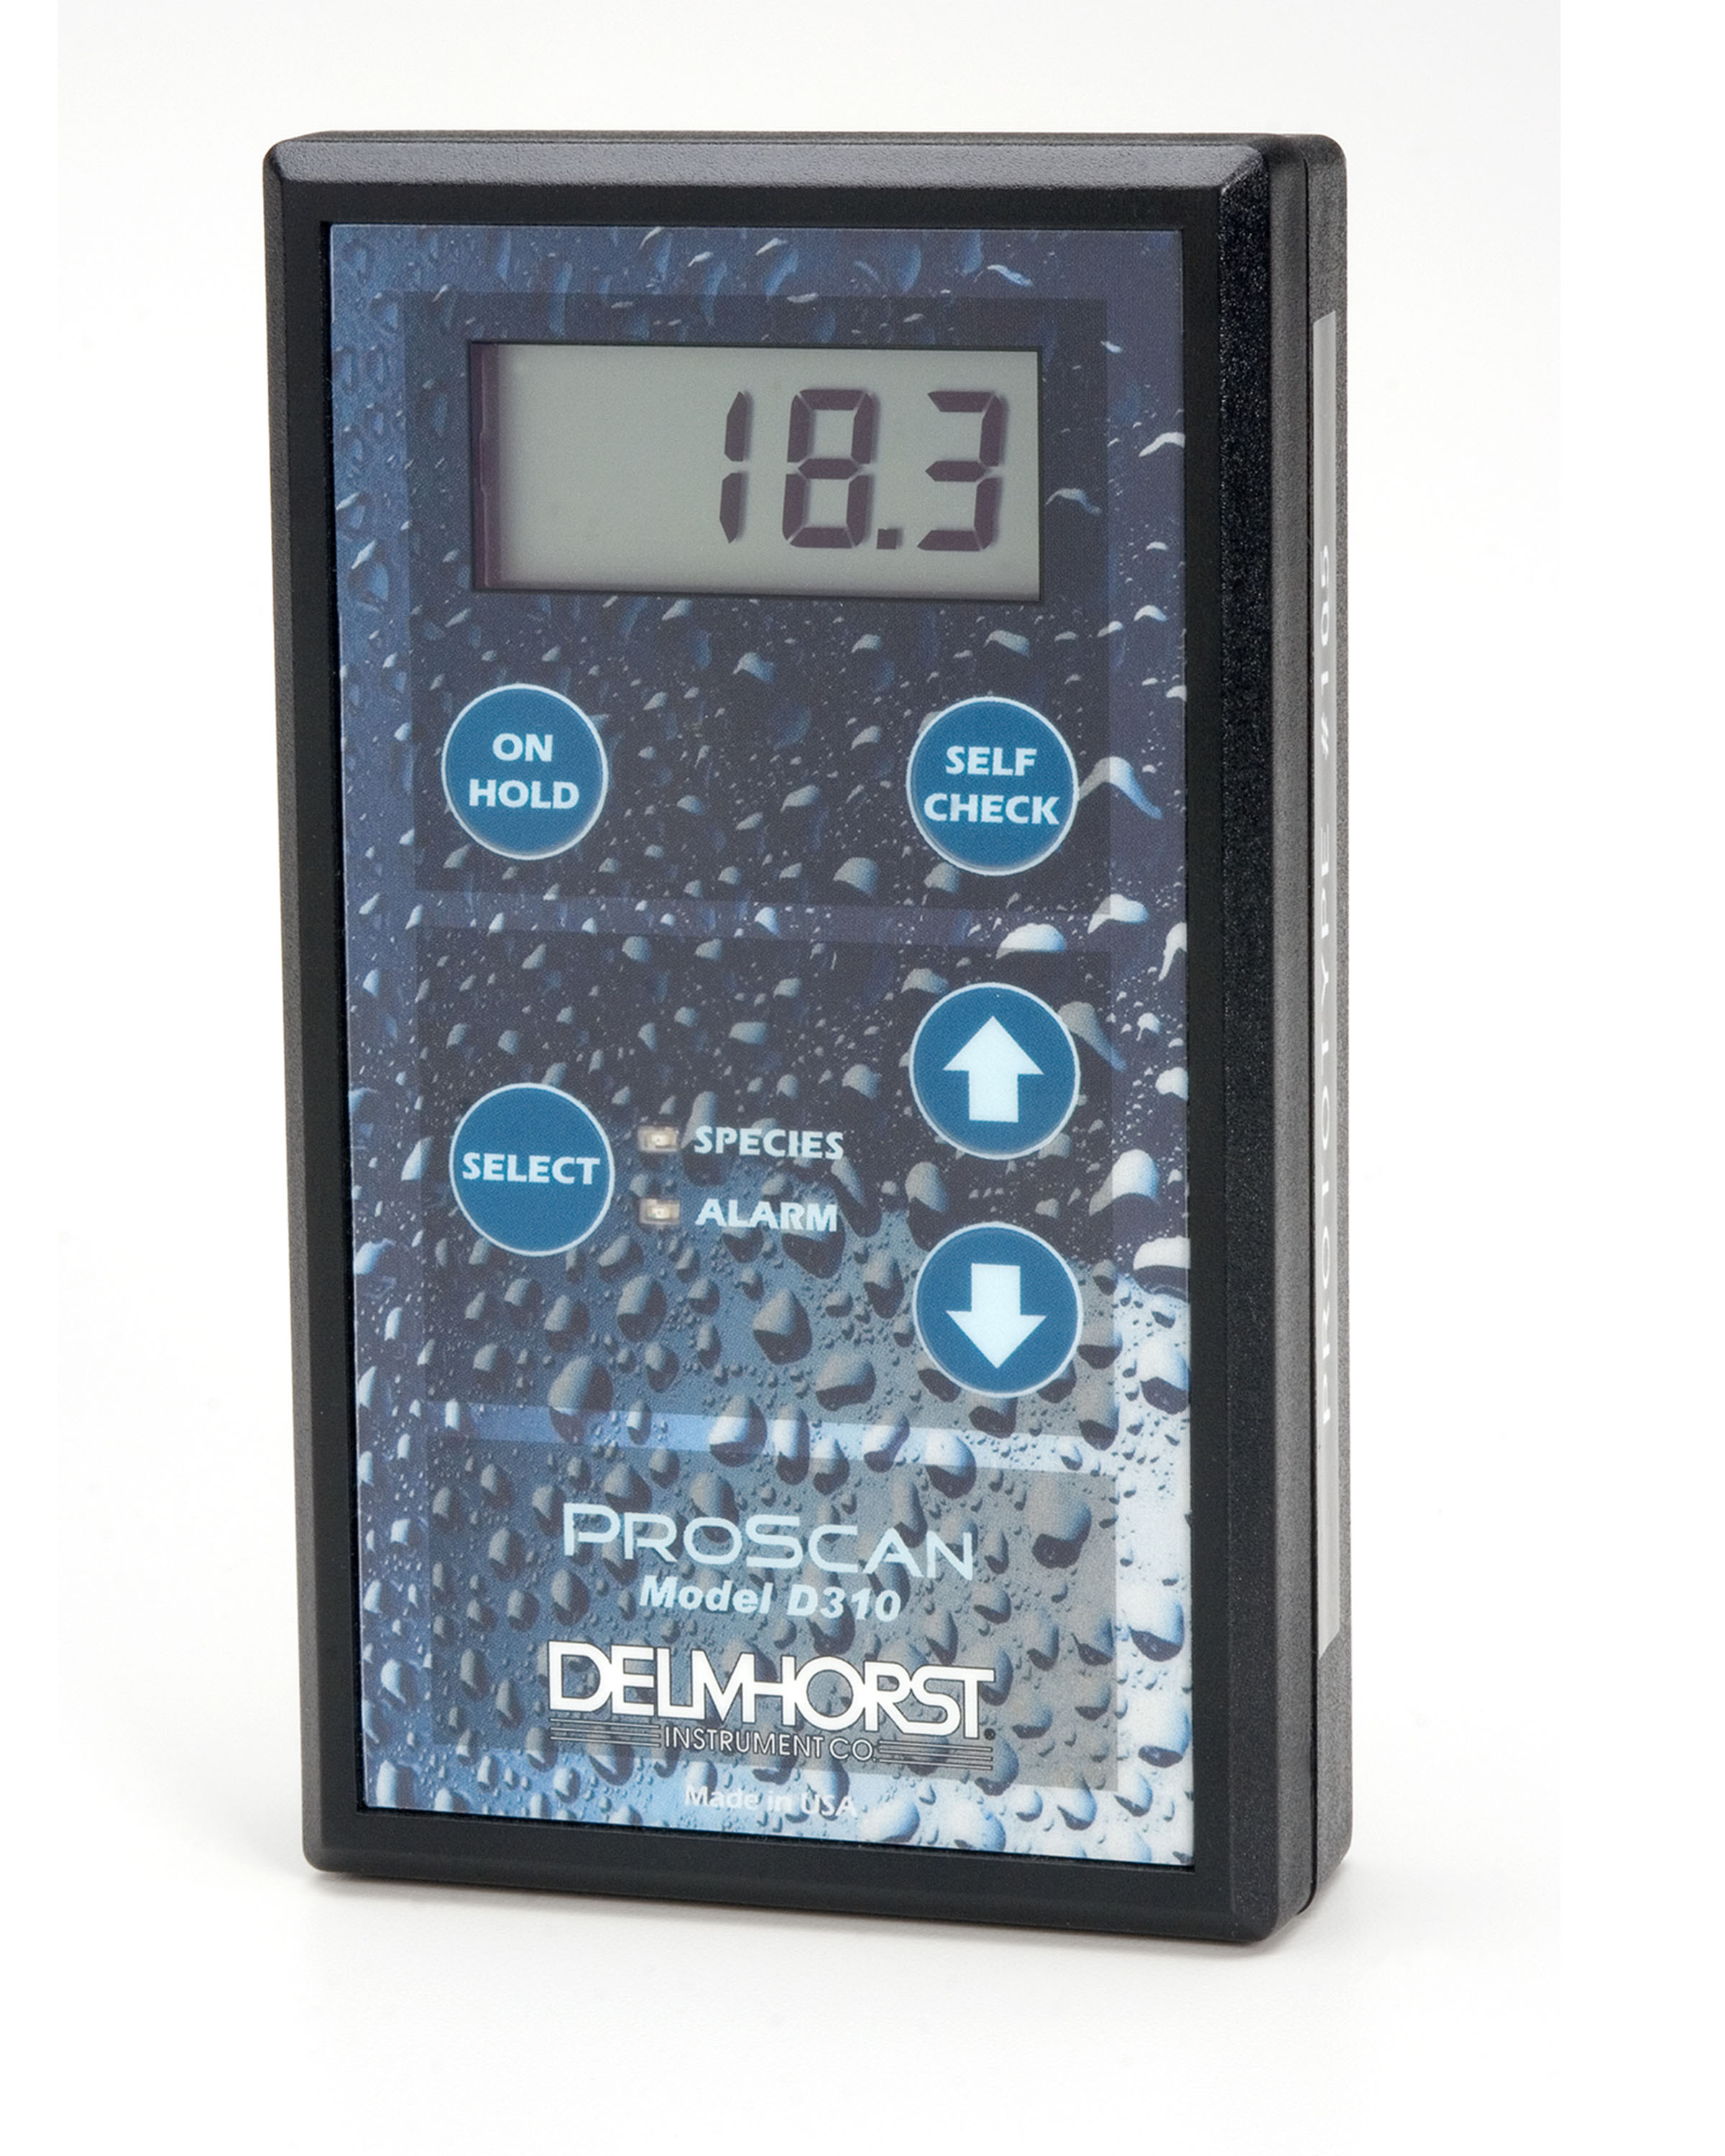 Proscan Moisture Meter Expans Delmhorst's Market Presence with Pinless Meters